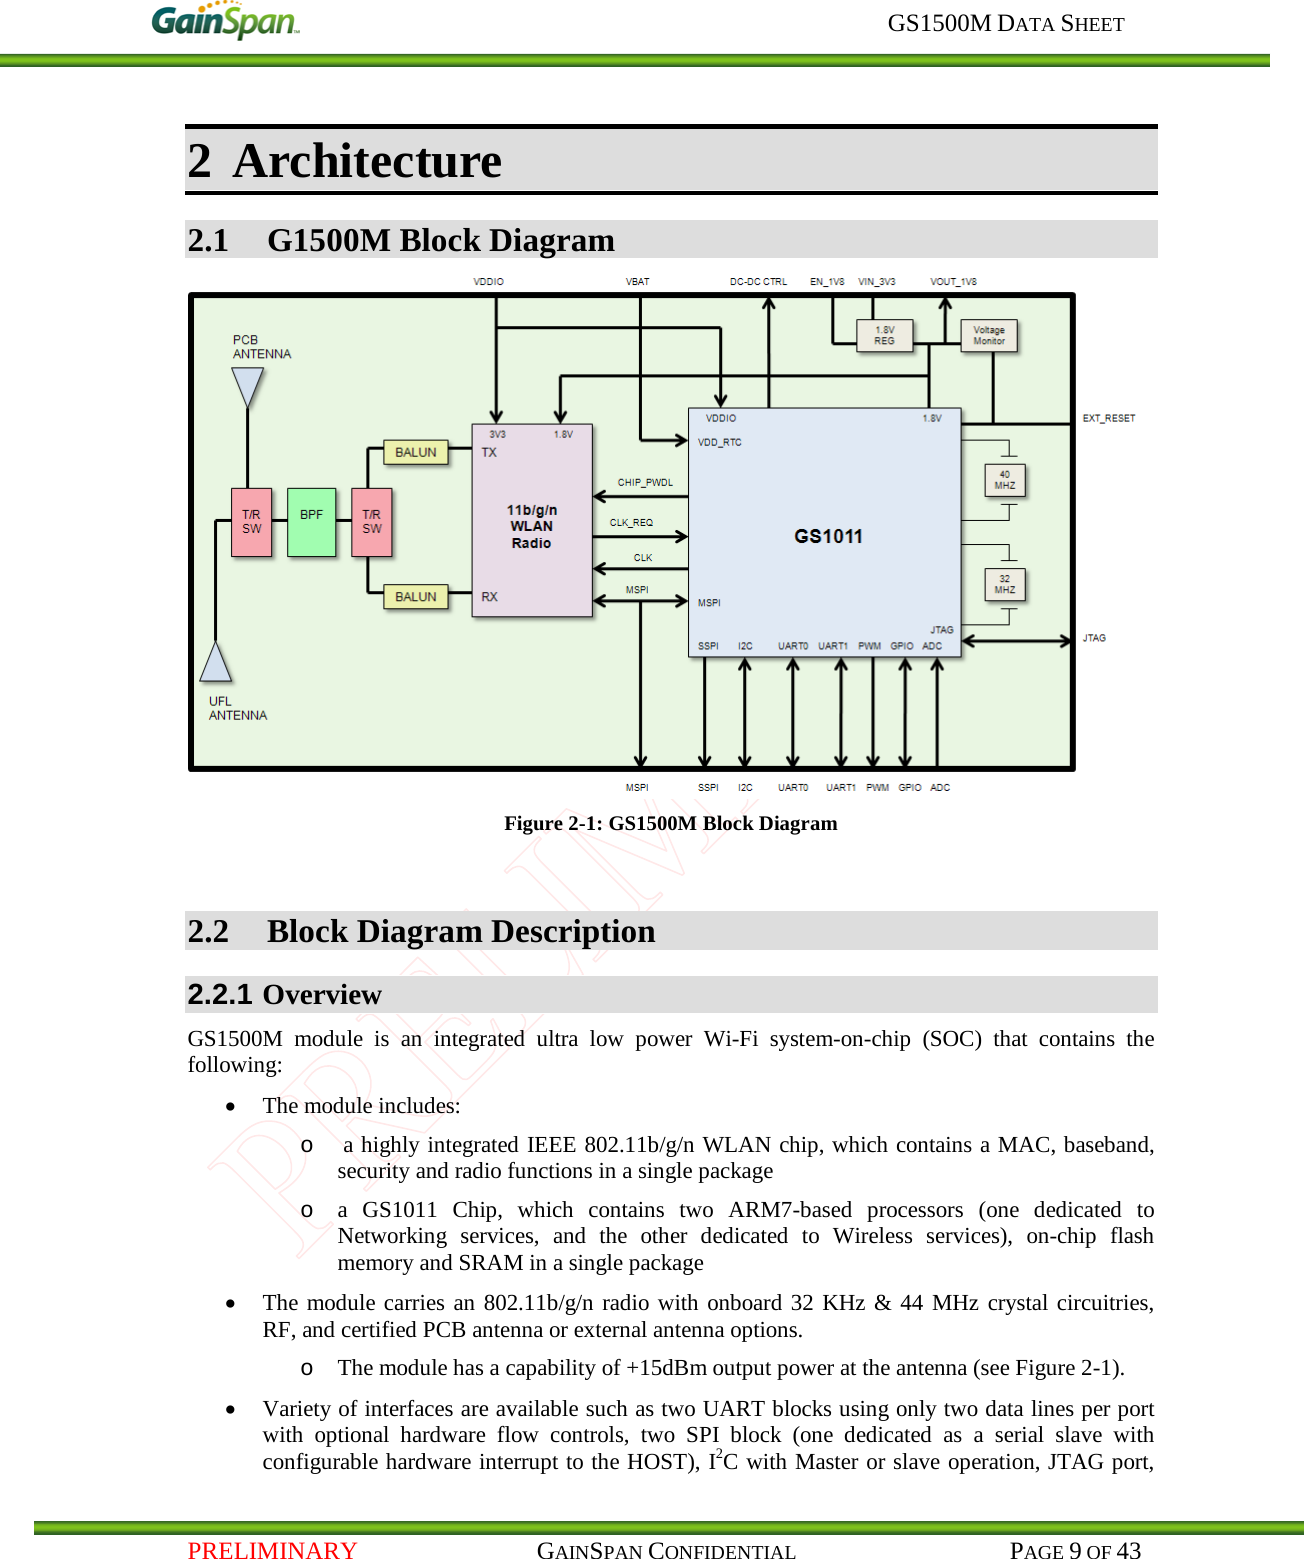     GS1500M DATA SHEET   PRELIMINARY                                    GAINSPAN CONFIDENTIAL                                           PAGE 9 OF 43 2 Architecture 2.1 G1500M Block Diagram  Figure 2-1: GS1500M Block Diagram  2.2 Block Diagram Description 2.2.1 Overview GS1500M  module  is  an  integrated ultra low power Wi-Fi system-on-chip (SOC) that contains the following: • The module includes: o  a highly integrated IEEE 802.11b/g/n WLAN chip, which contains a MAC, baseband, security and radio functions in a single package o a  GS1011  Chip, which contains  two ARM7-based processors (one dedicated to Networking services, and the other dedicated to Wireless services),  on-chip flash memory and SRAM in a single package • The module carries an 802.11b/g/n radio with onboard 32 KHz &amp; 44 MHz crystal circuitries, RF, and certified PCB antenna or external antenna options. o The module has a capability of +15dBm output power at the antenna (see Figure 2-1). • Variety of interfaces are available such as two UART blocks using only two data lines per port with optional hardware flow controls, two SPI block (one dedicated as a serial slave with configurable hardware interrupt to the HOST), I2C with Master or slave operation, JTAG port, 